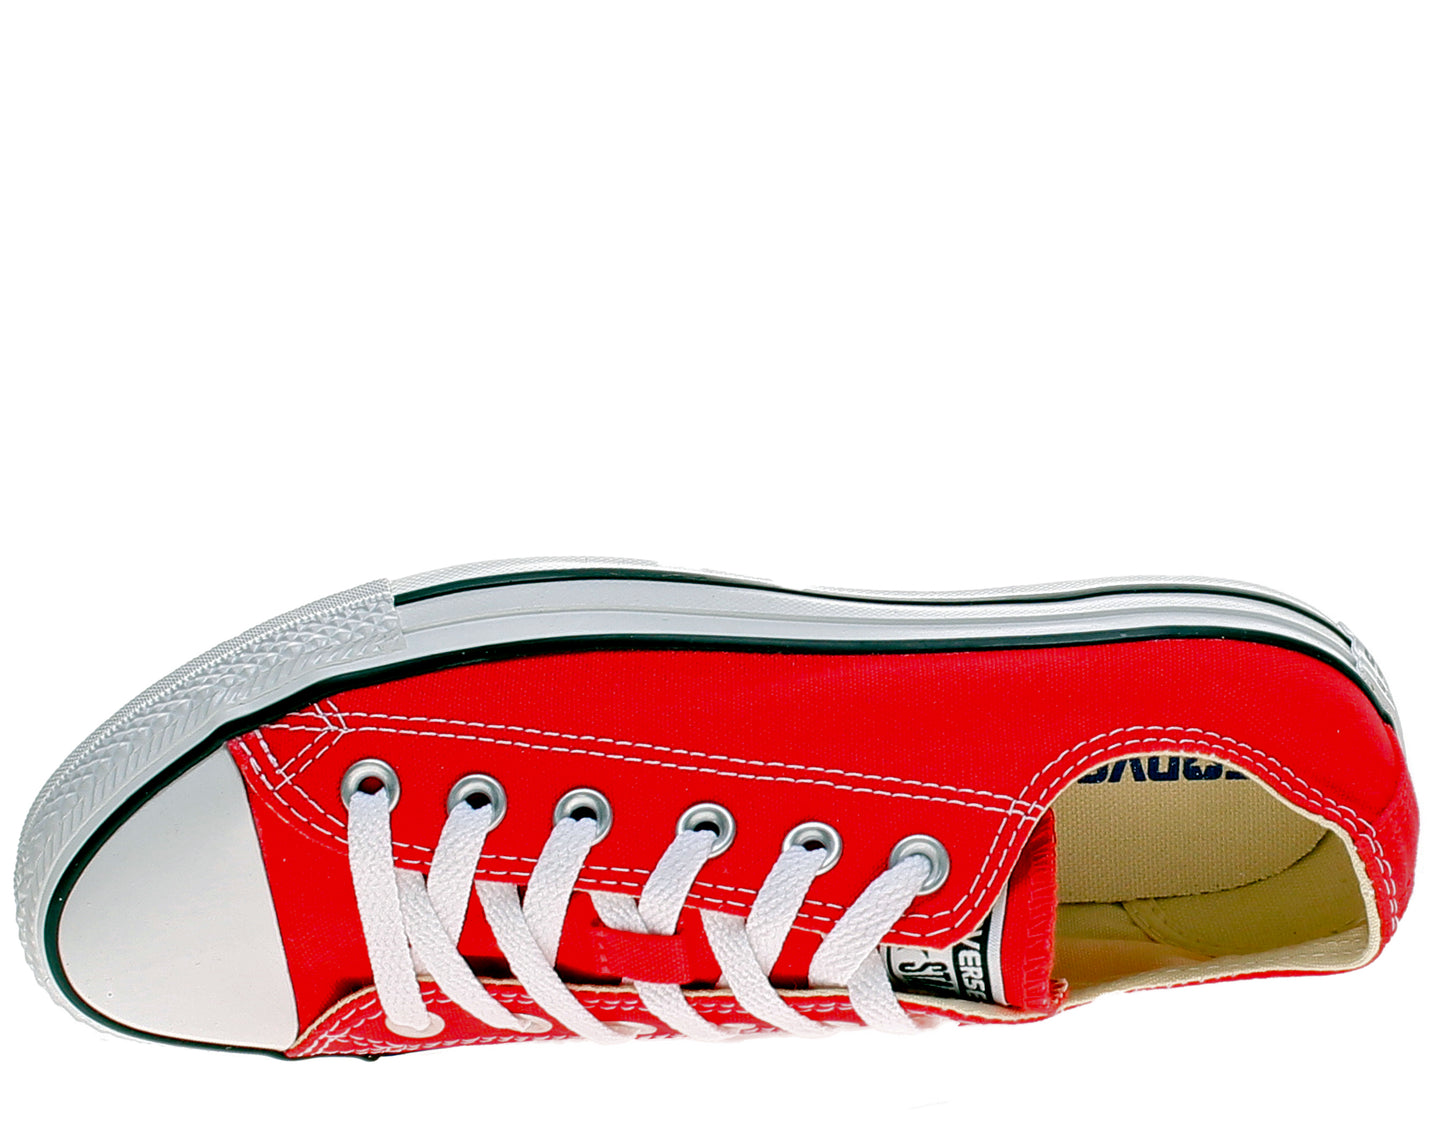 Converse Chuck Taylor All Star OX Low Top Sneakers